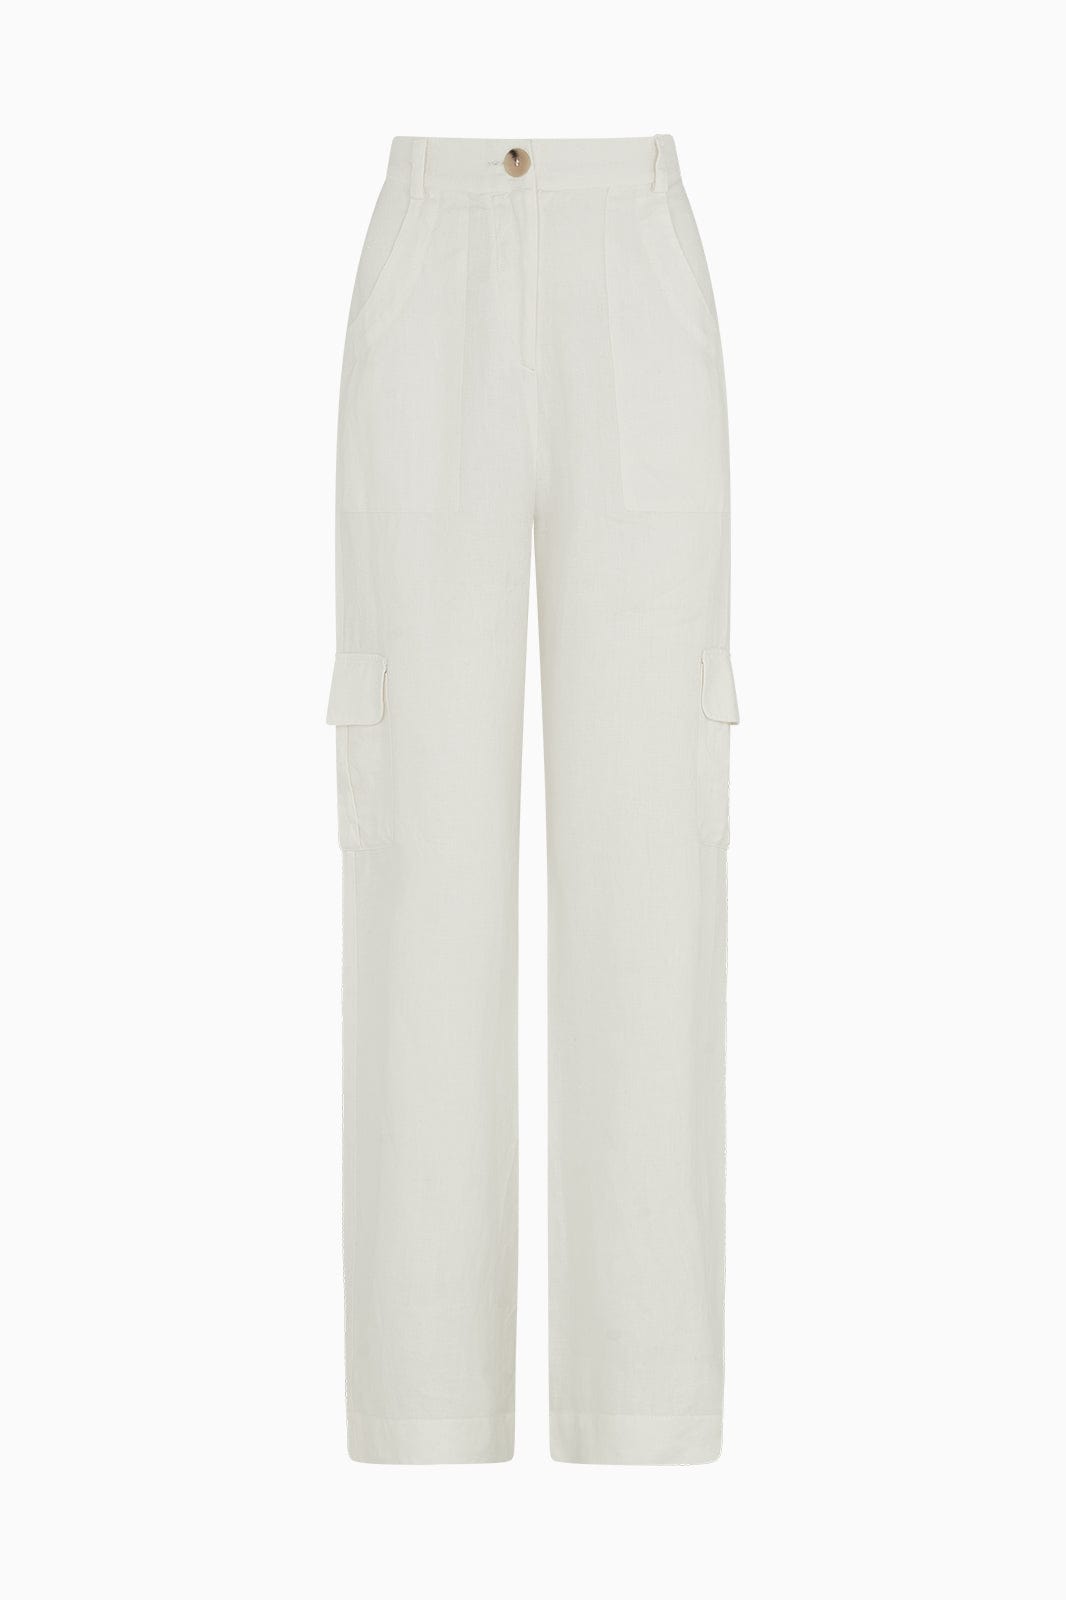 arkitaip Trousers The Carolina Linen Cargo Trousers in off-white